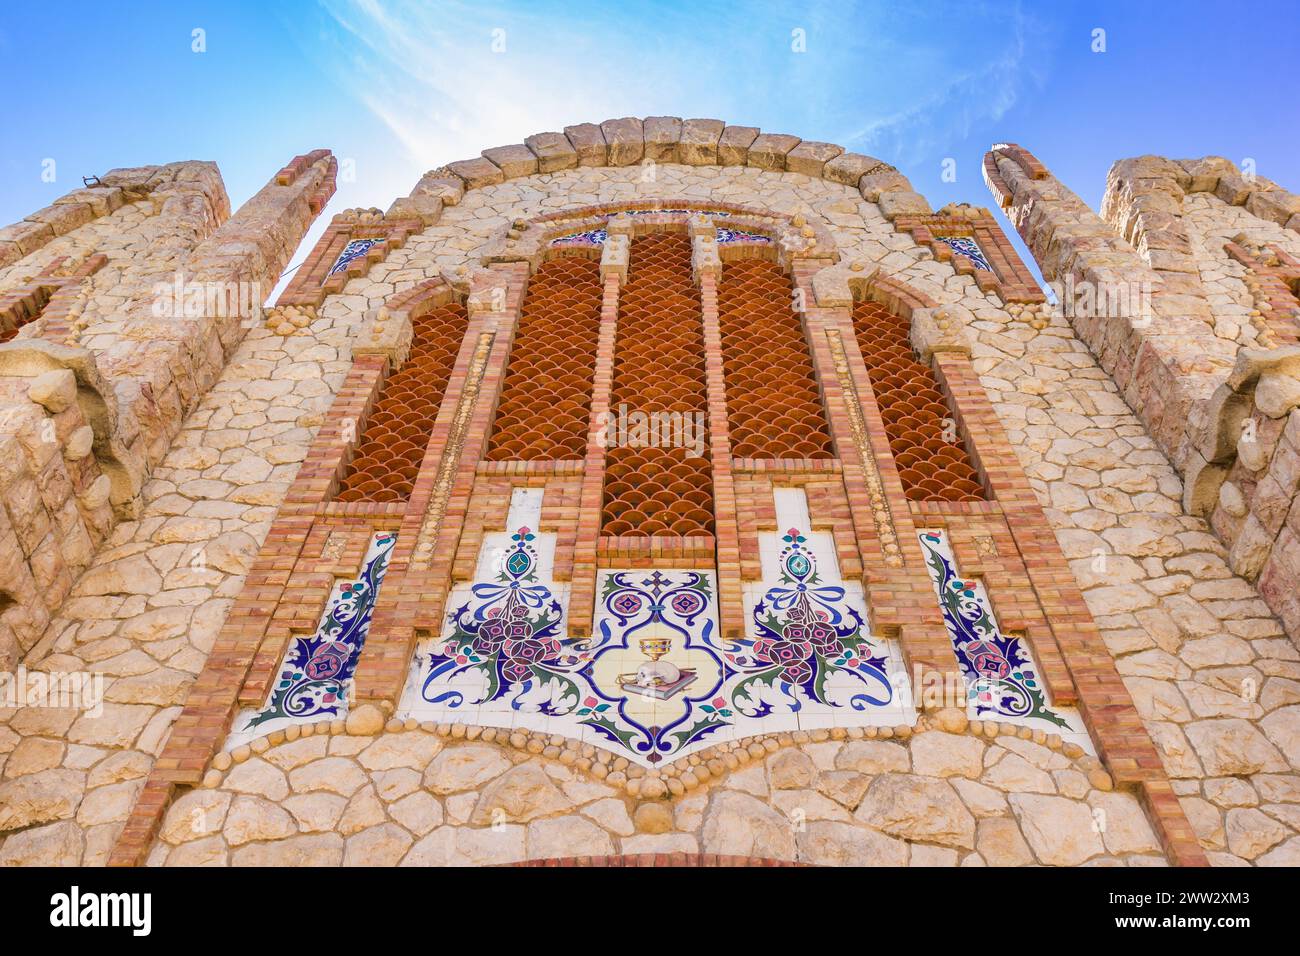 Facade with ceramic tiles decoration of the church in Novelda, Spain Stock Photo